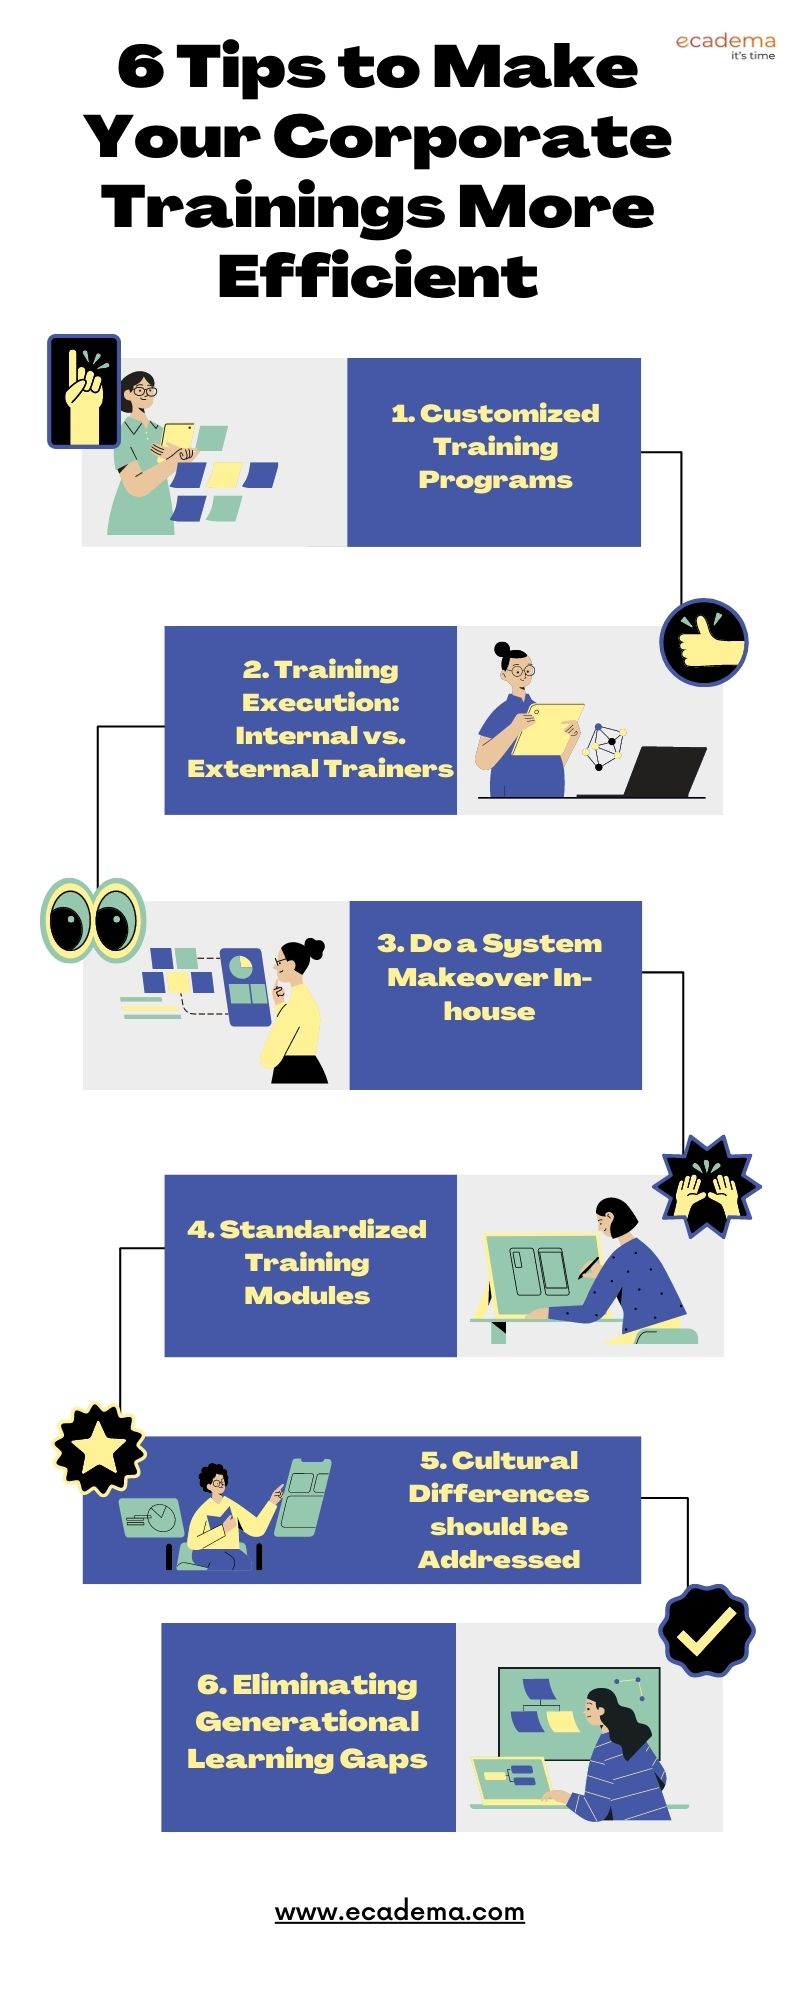 6 Tips to Make Your Corporate Trainings More Efficient.jpg  by ecadema